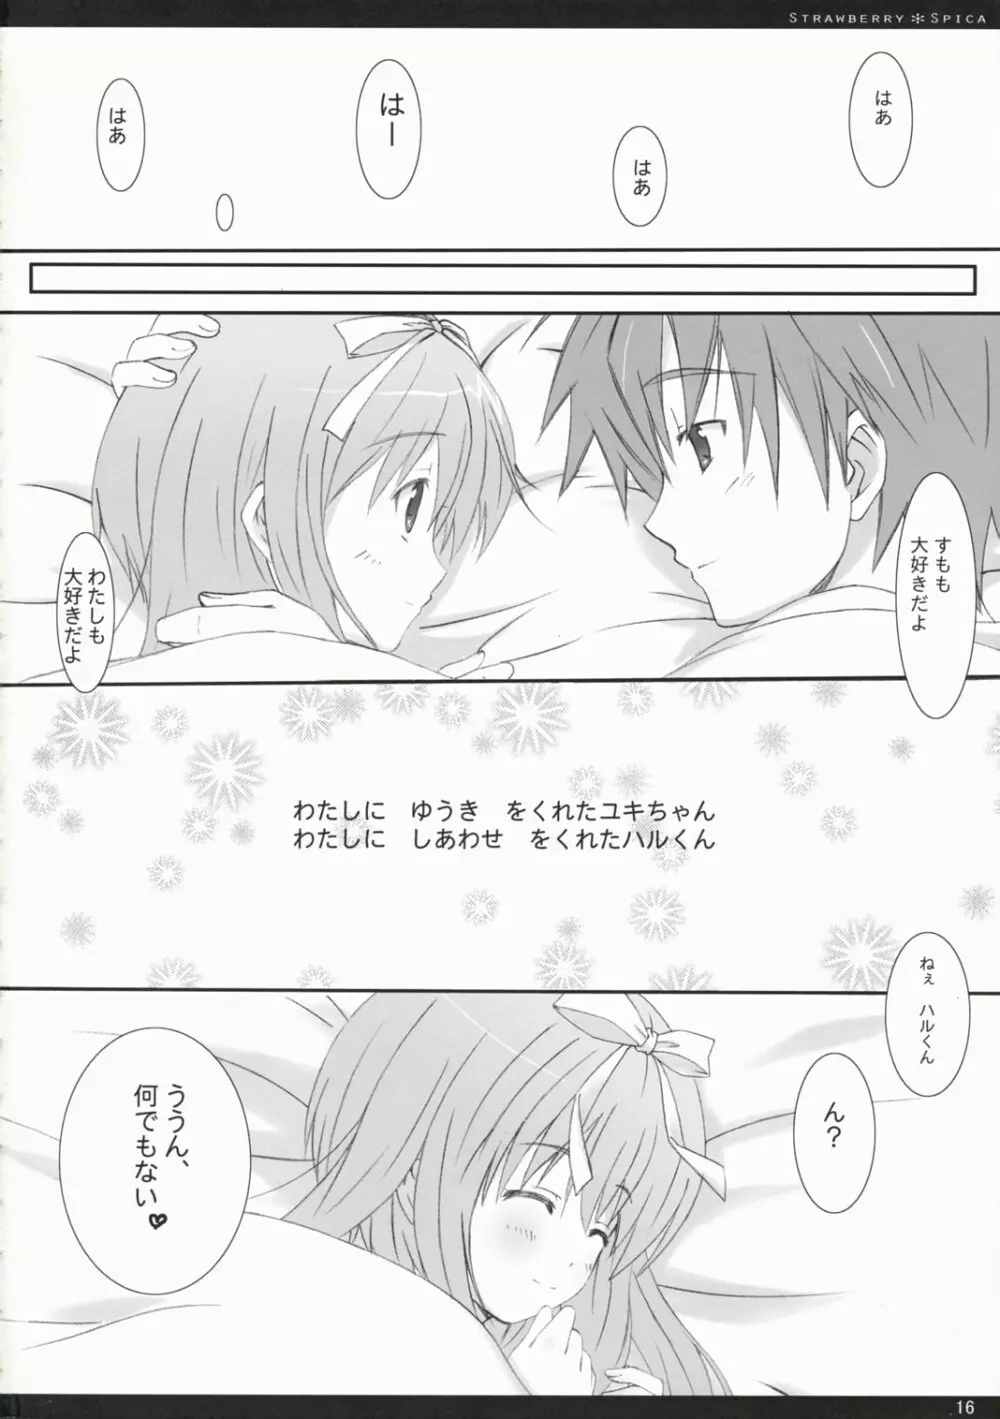 Strawberry Spica Page.15